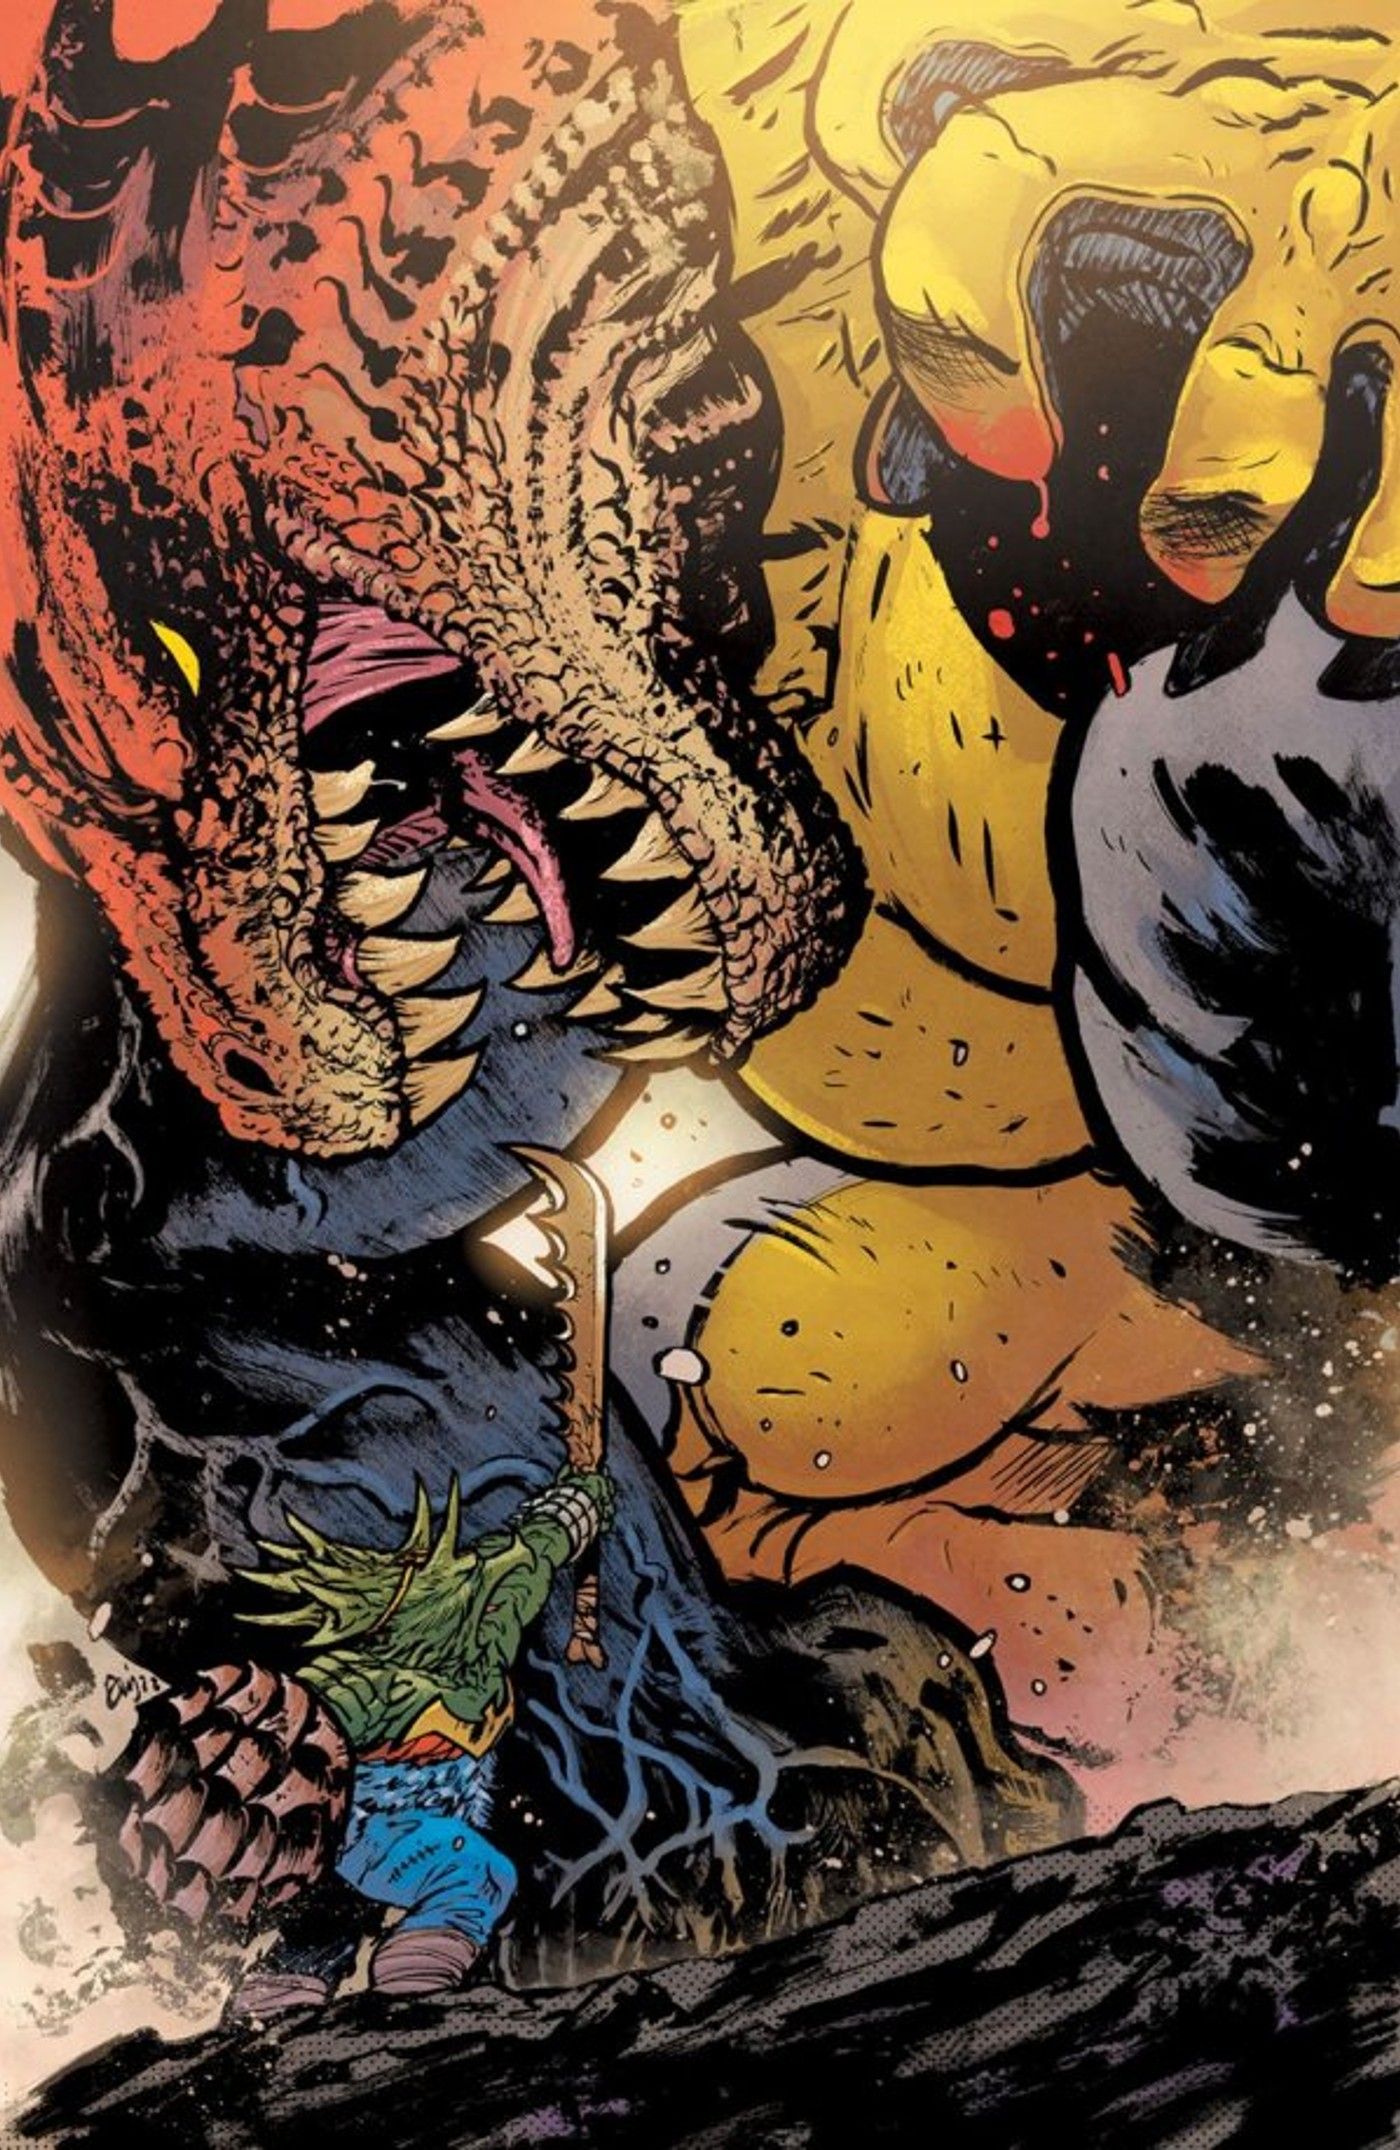 Cover for DC's Jurassic League #3, featuring dinosaur versions of Wonder Woman and Giganta